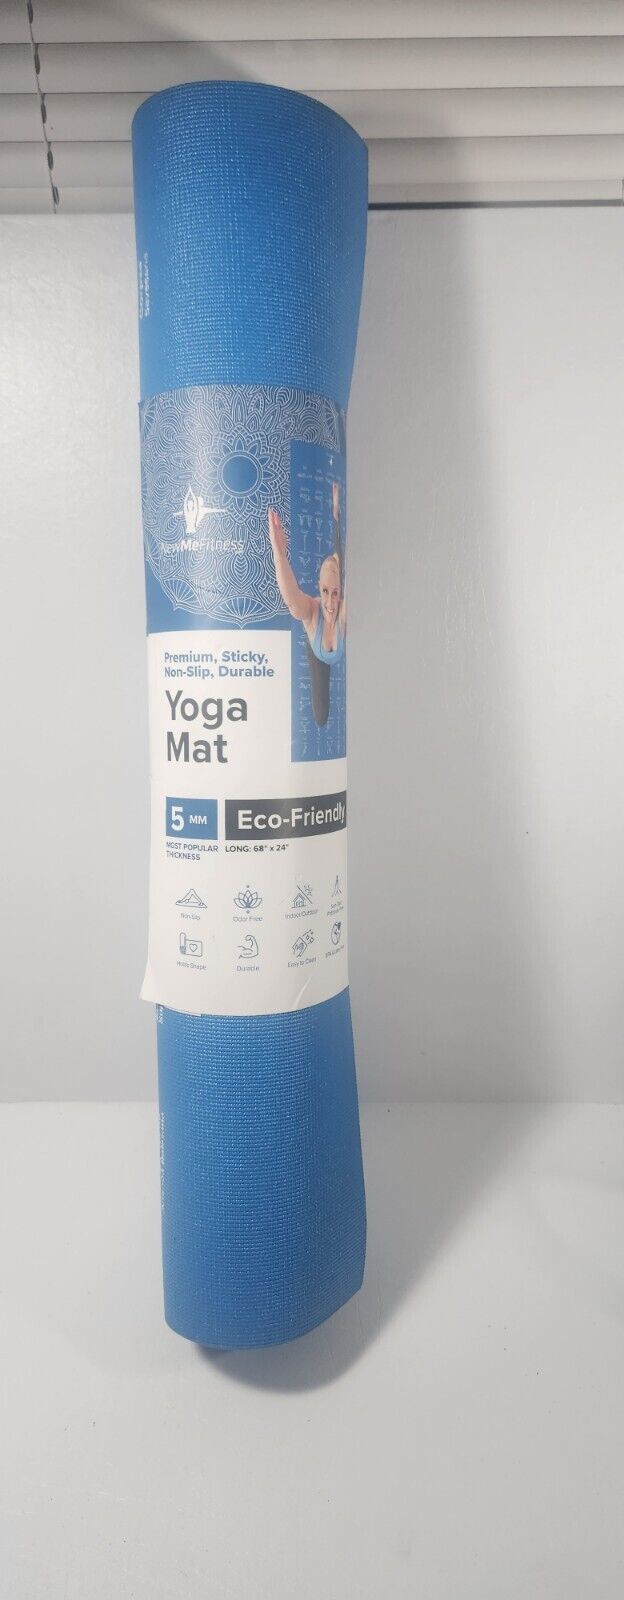 NewMe, Fitness Instructional Yoga Mat, Printed w/ Illustrated Poses, Blue